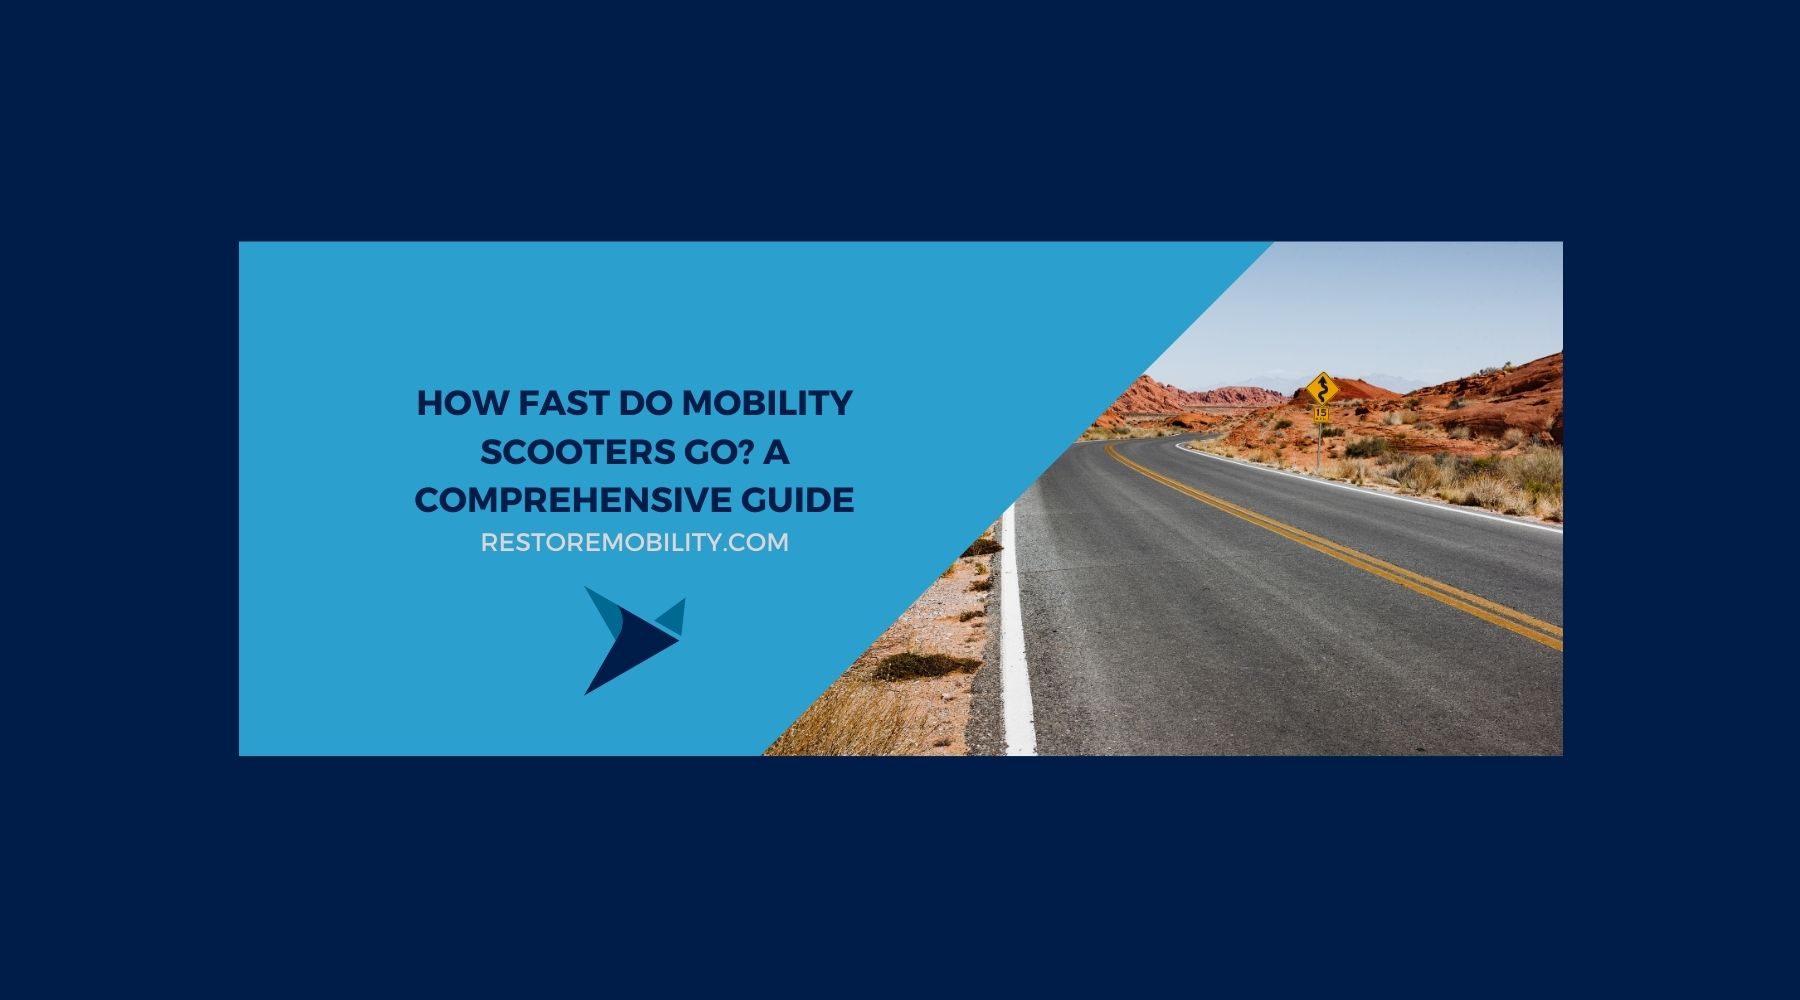 How Fast Do Mobility Scooters Go? A Comprehensive Guide